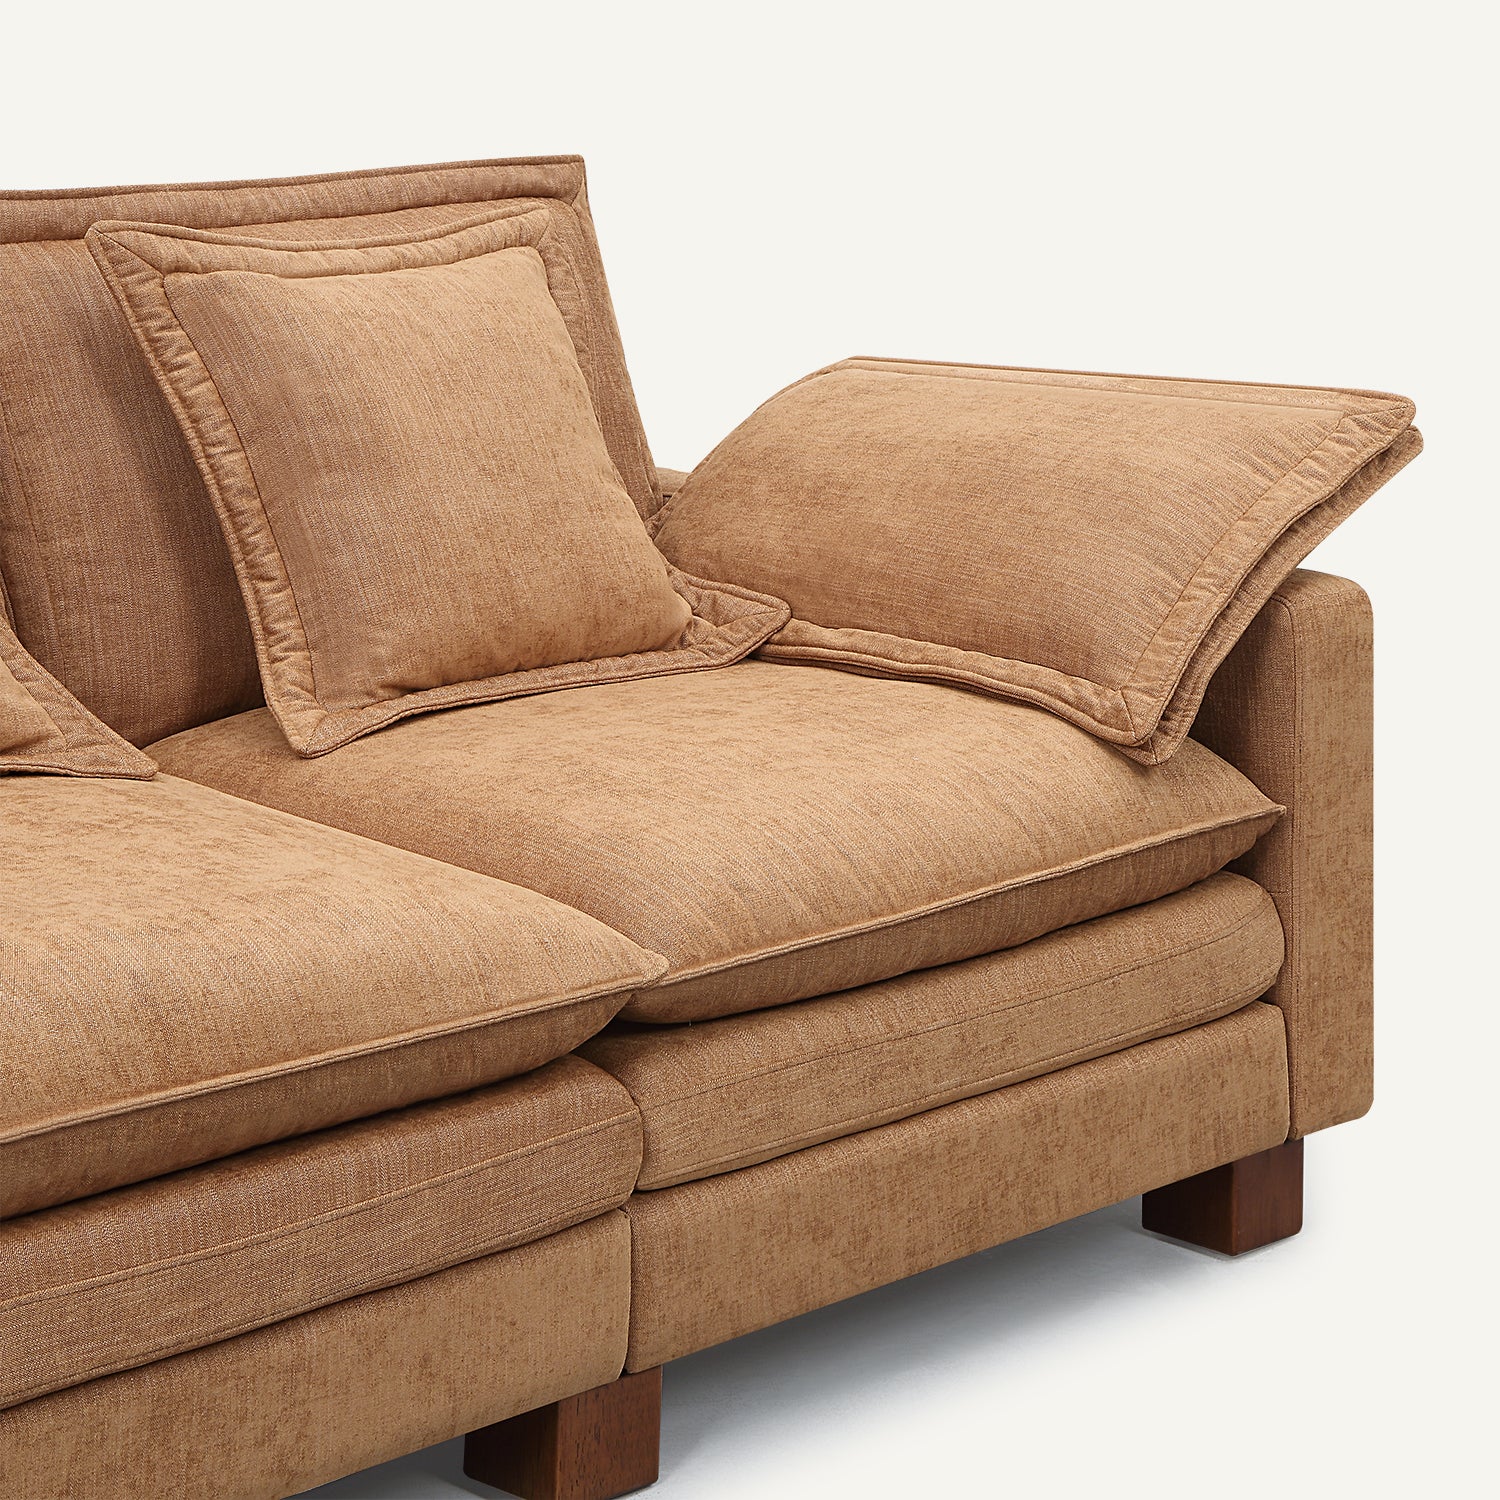 Stacked Tan Linen 6-Seat U Sectional